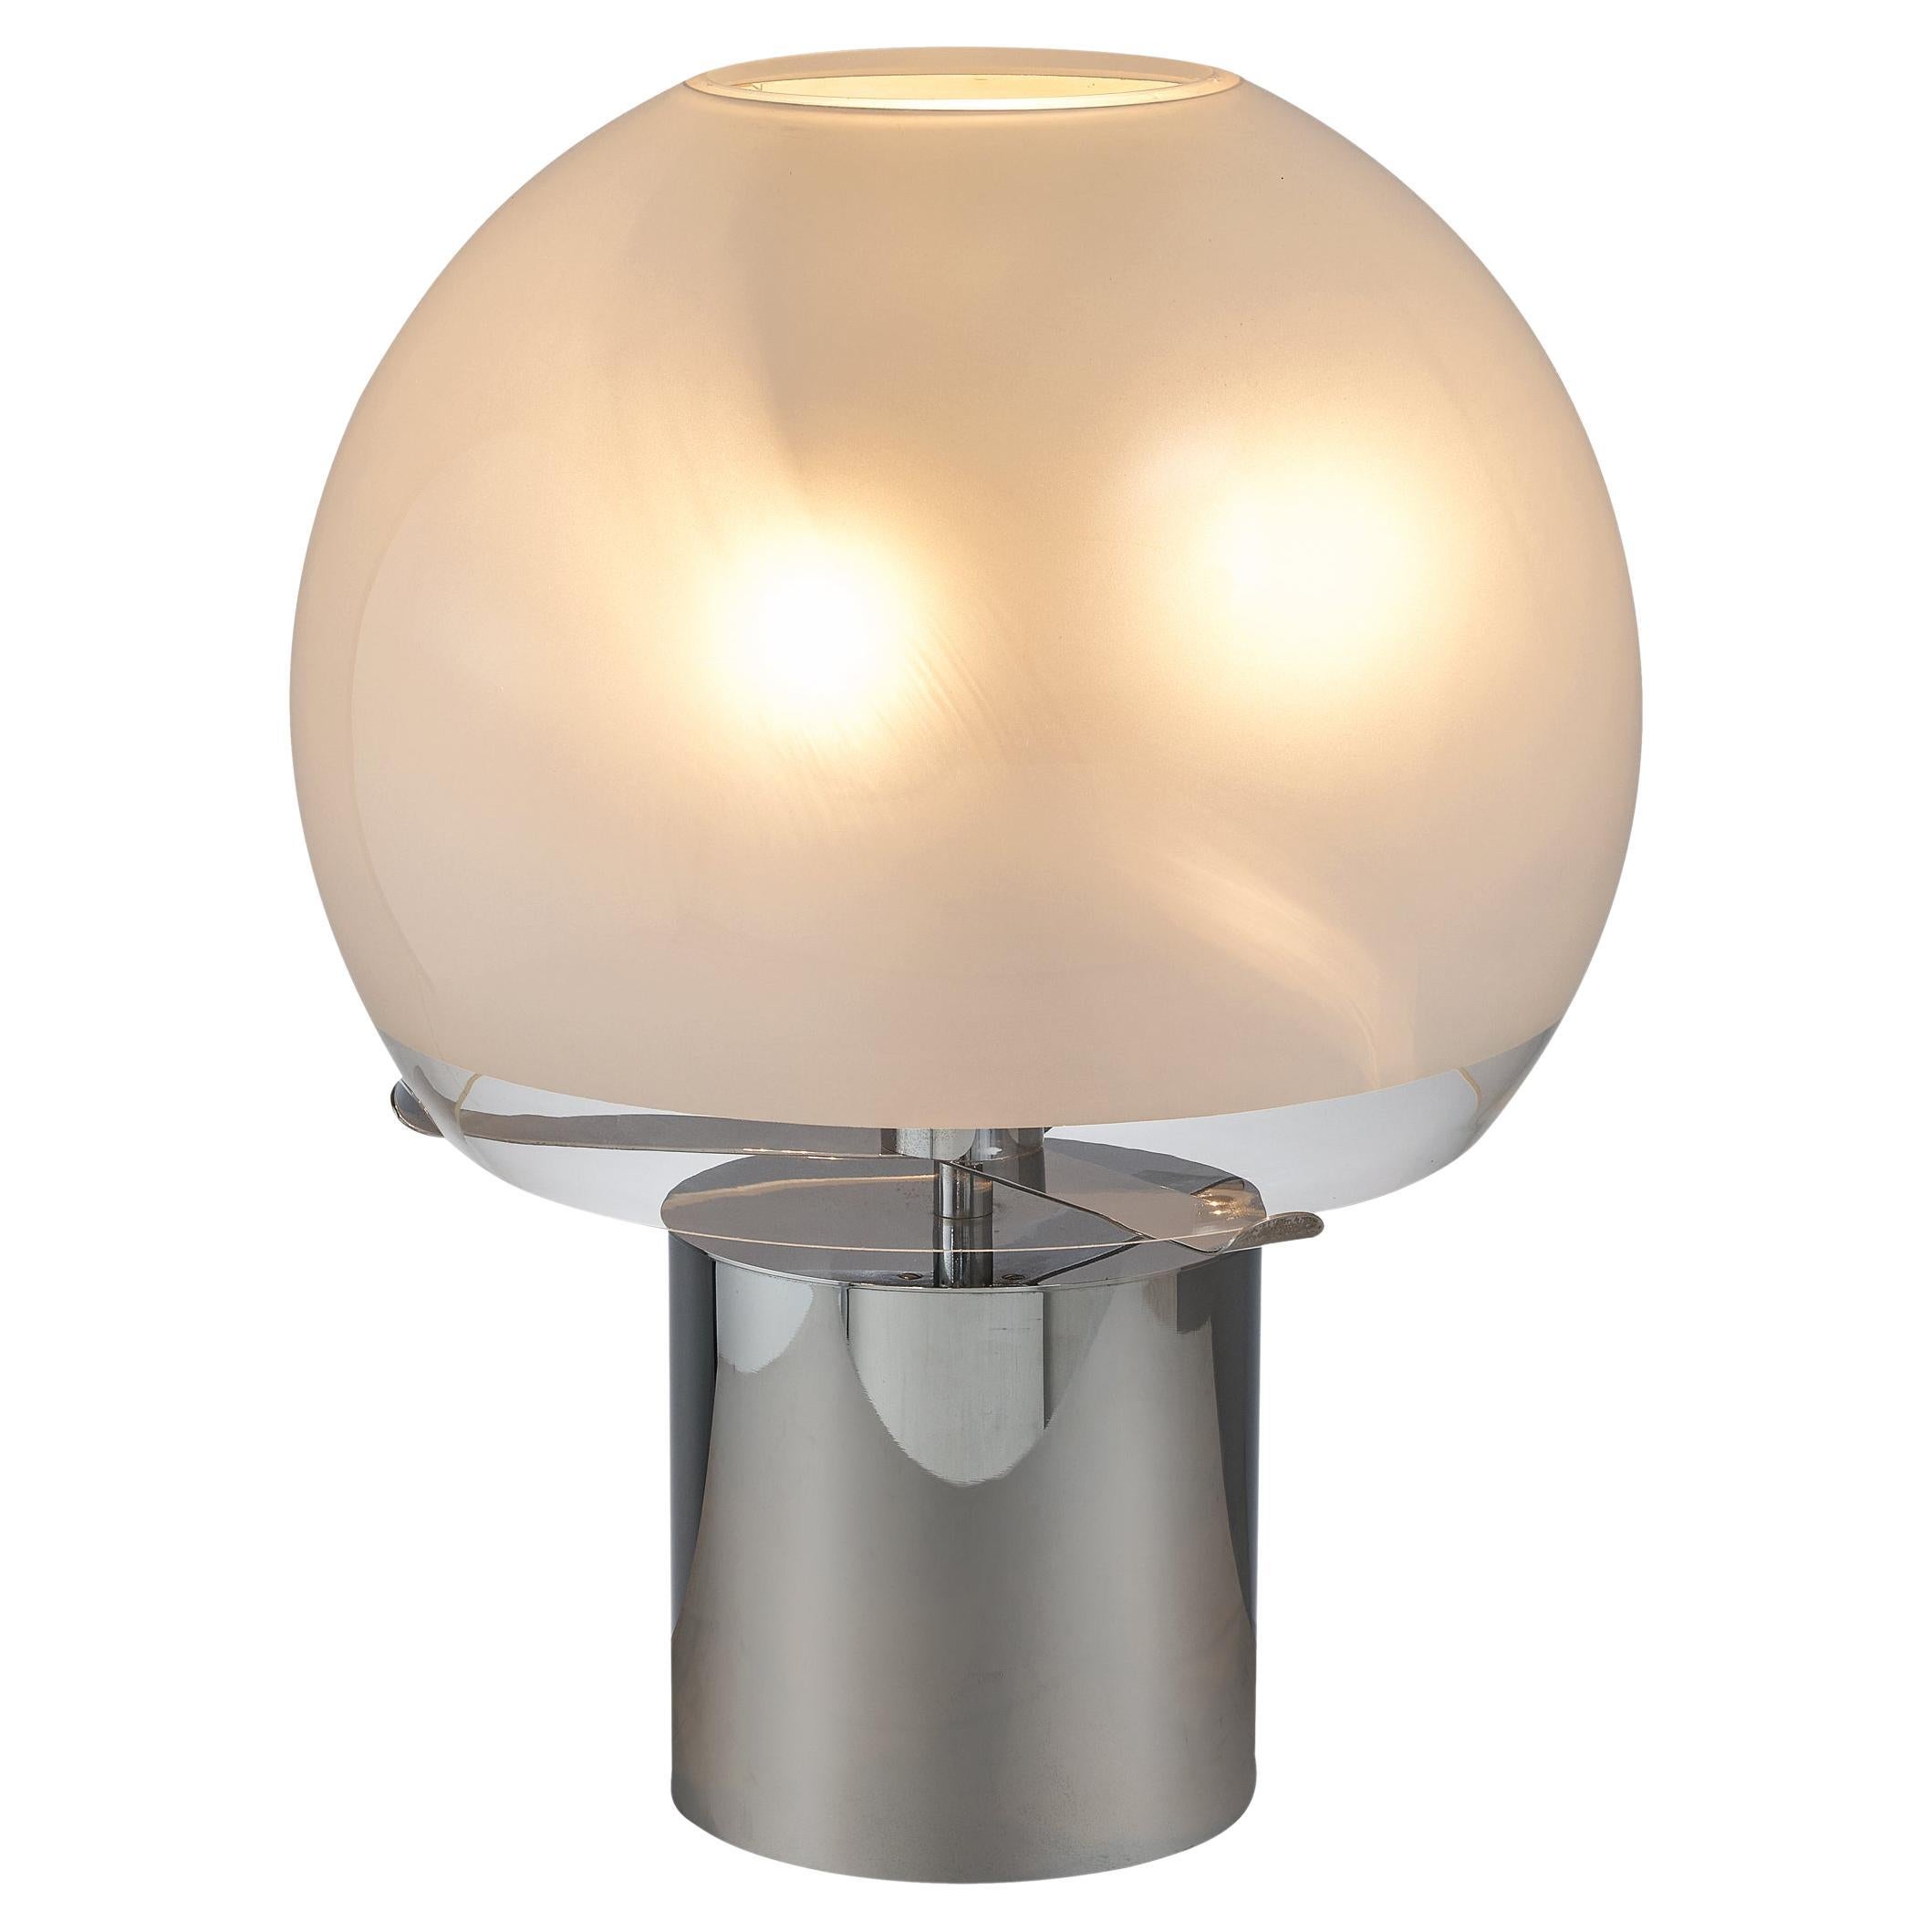 Luigi Caccia Dominioni for Azucena Table Lamp in Chrome and Frosted Glass For Sale